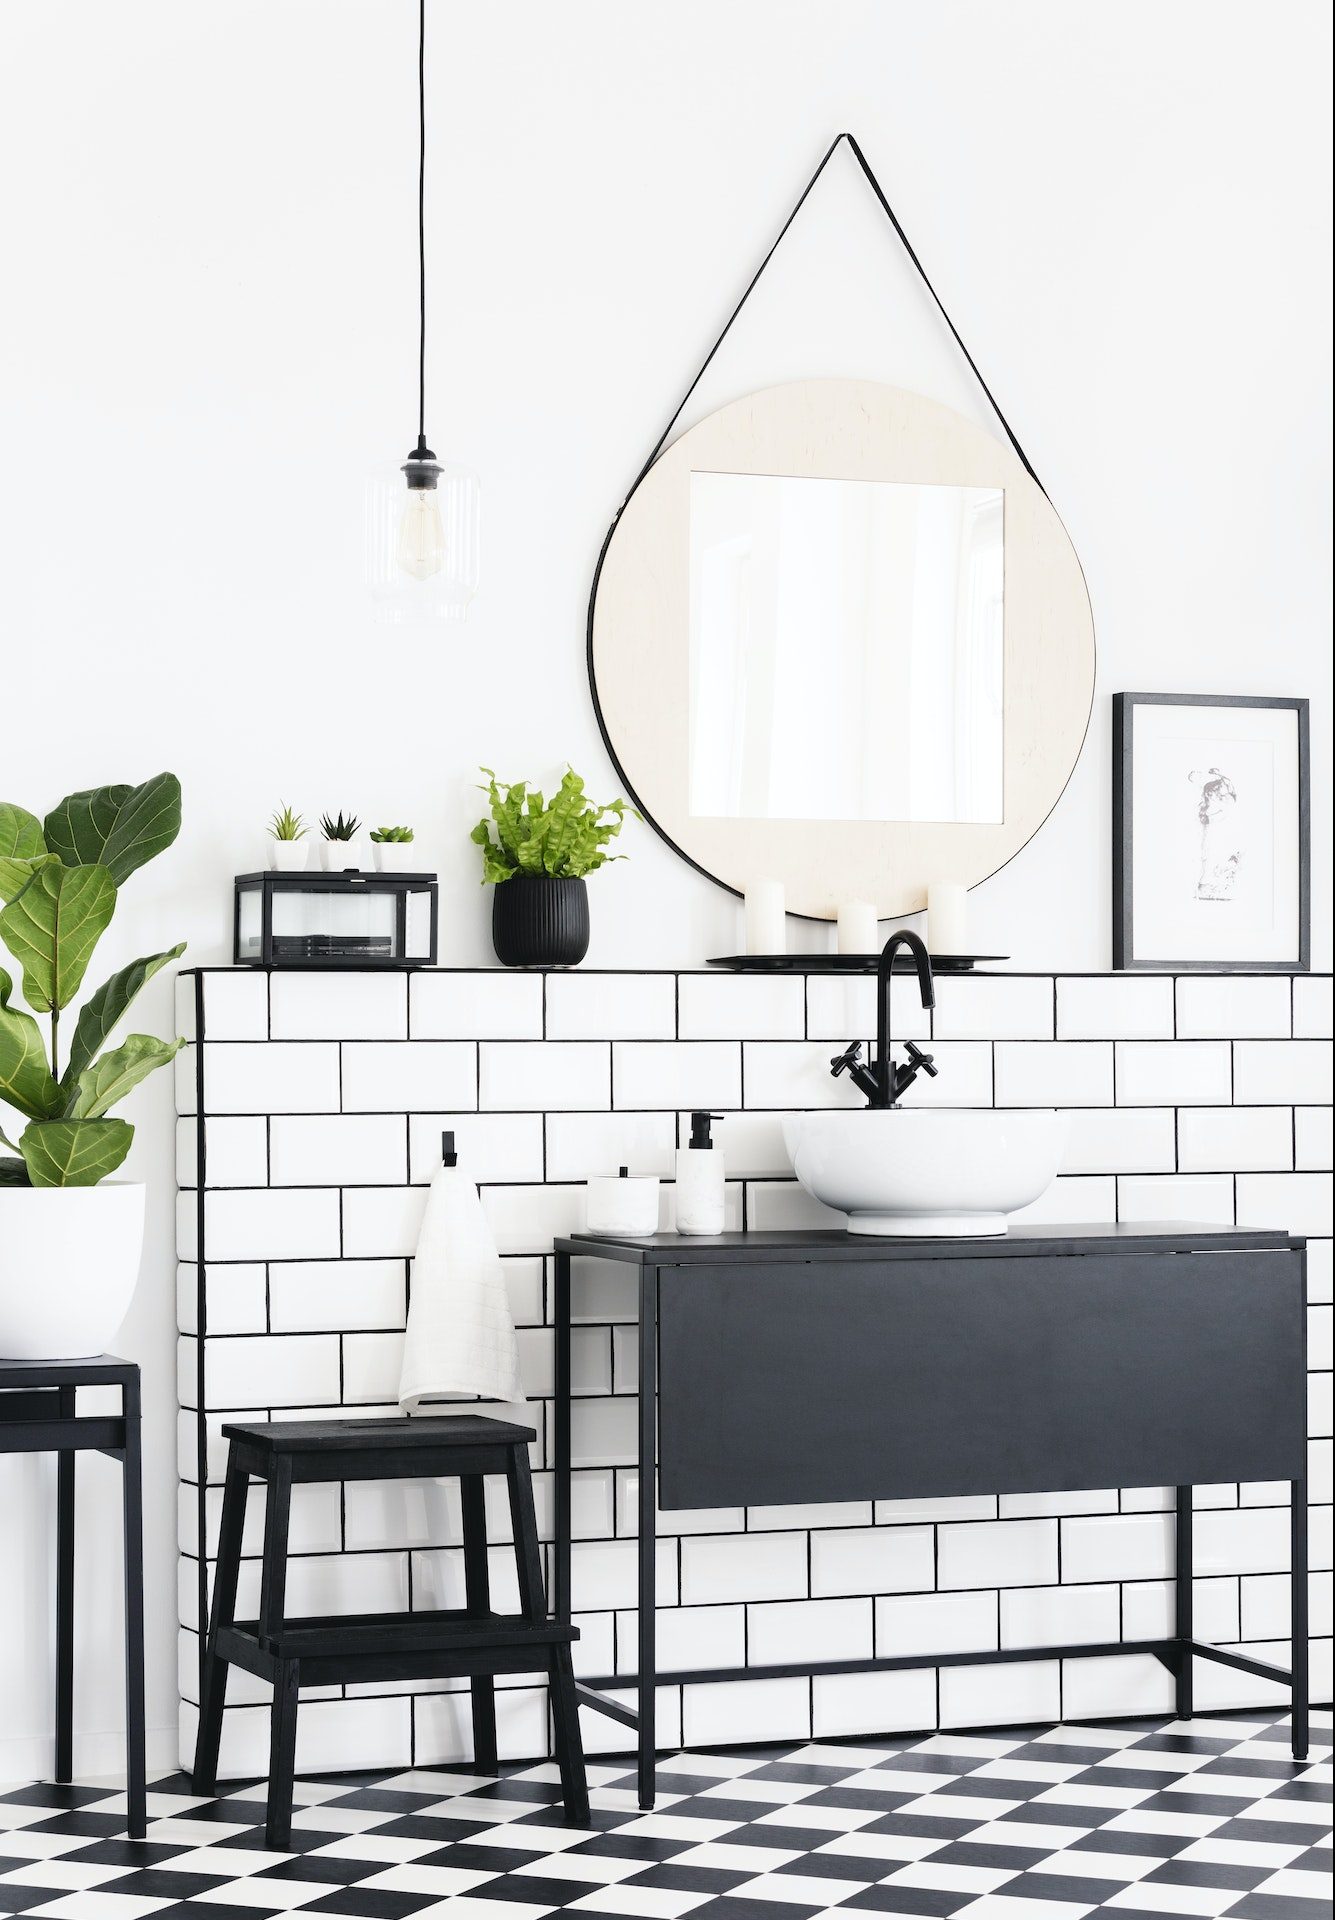 Plants and mirror in black and white bathroom interior with chec